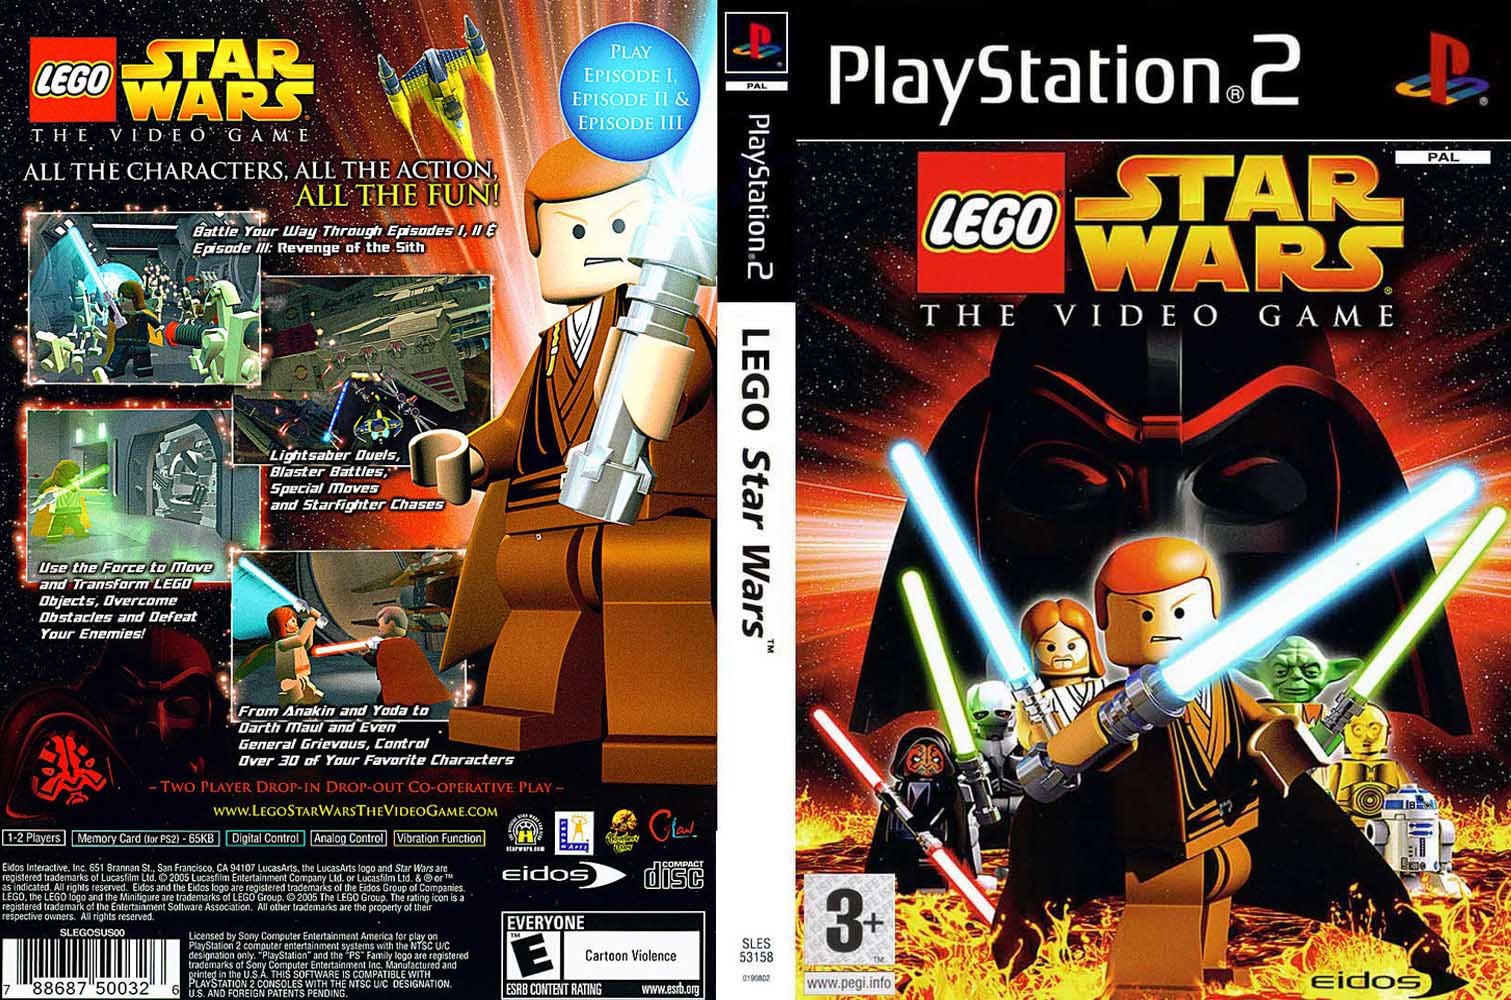 Lego Star Wars The Video Game Wallpapers Video Game Hq Lego Images, Photos, Reviews